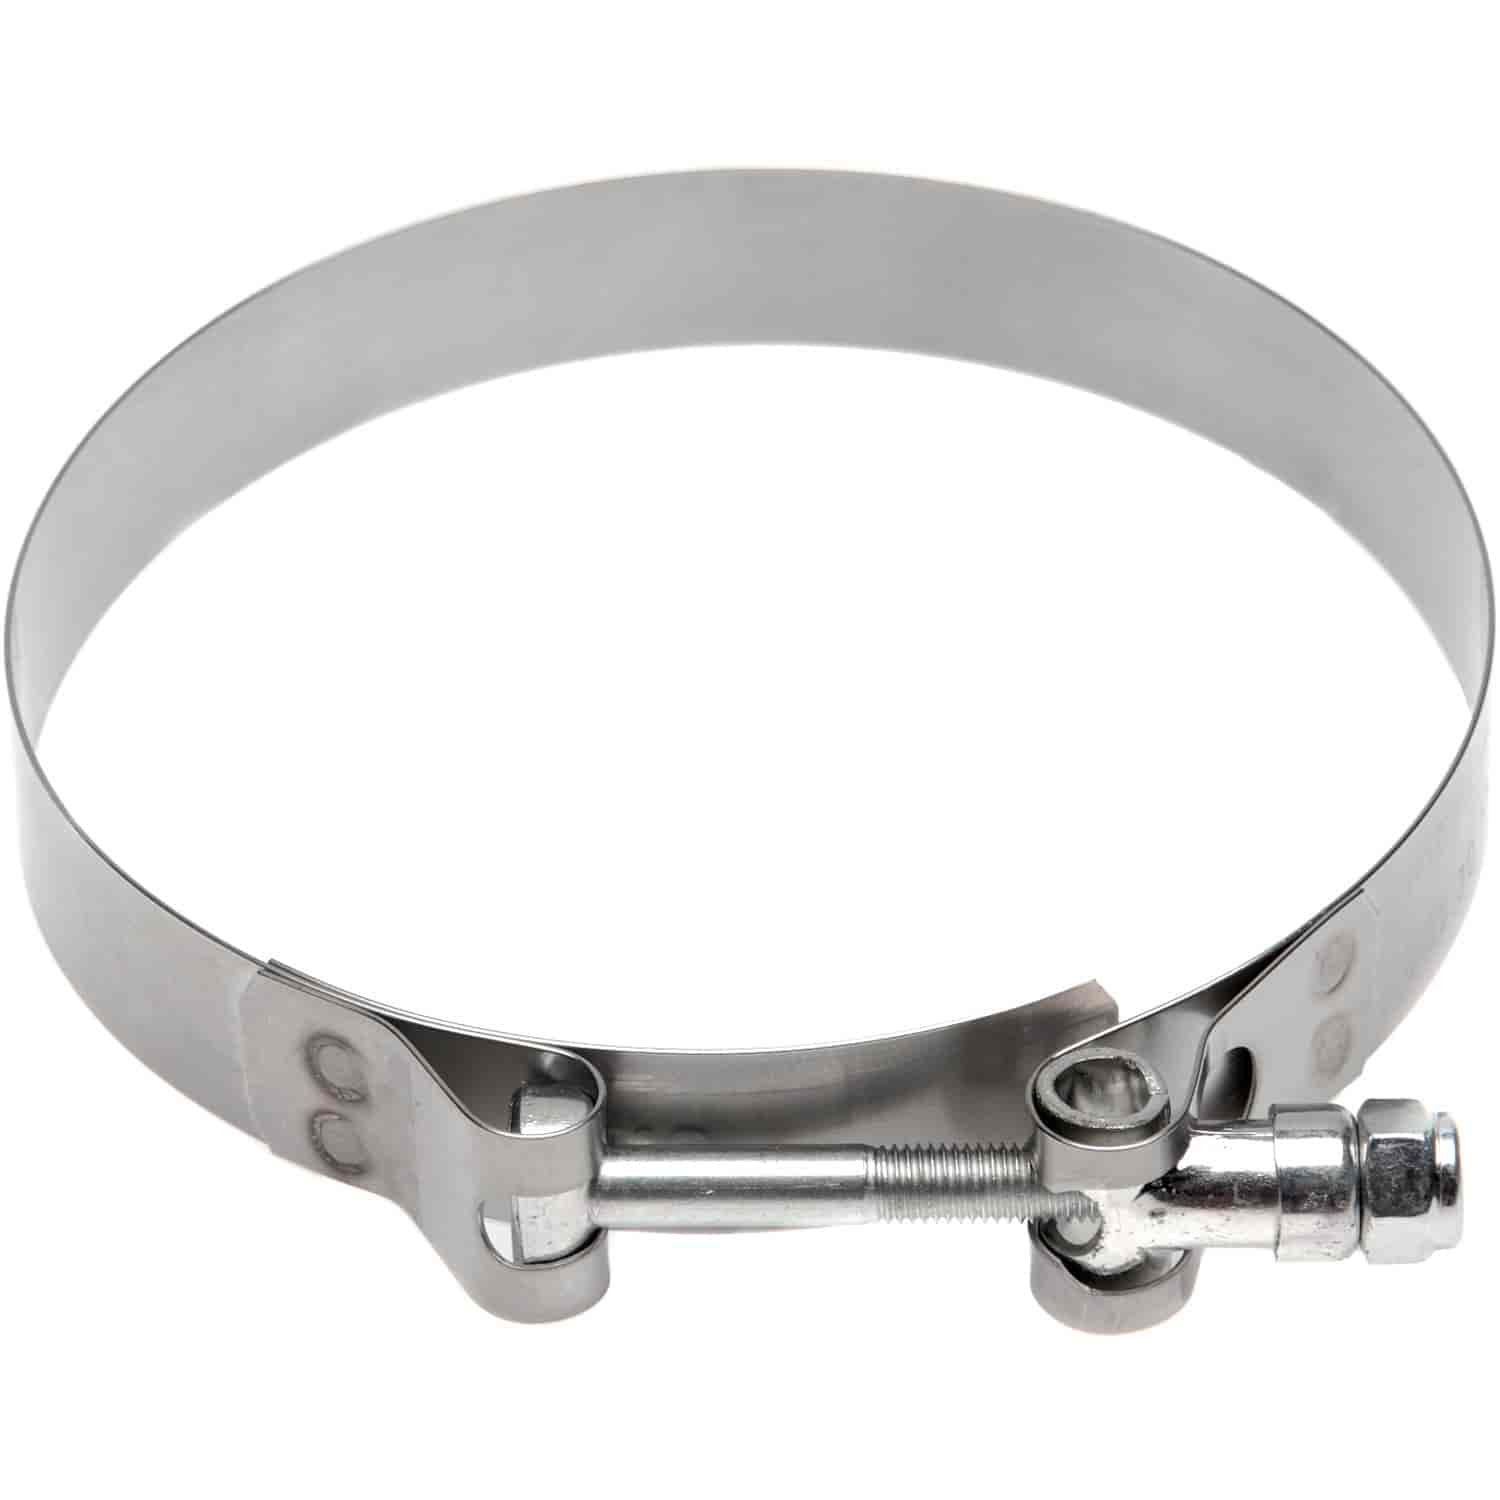 T-Bolt Hose Clamp [7.313 in. to 7 in. Outside Diameter]